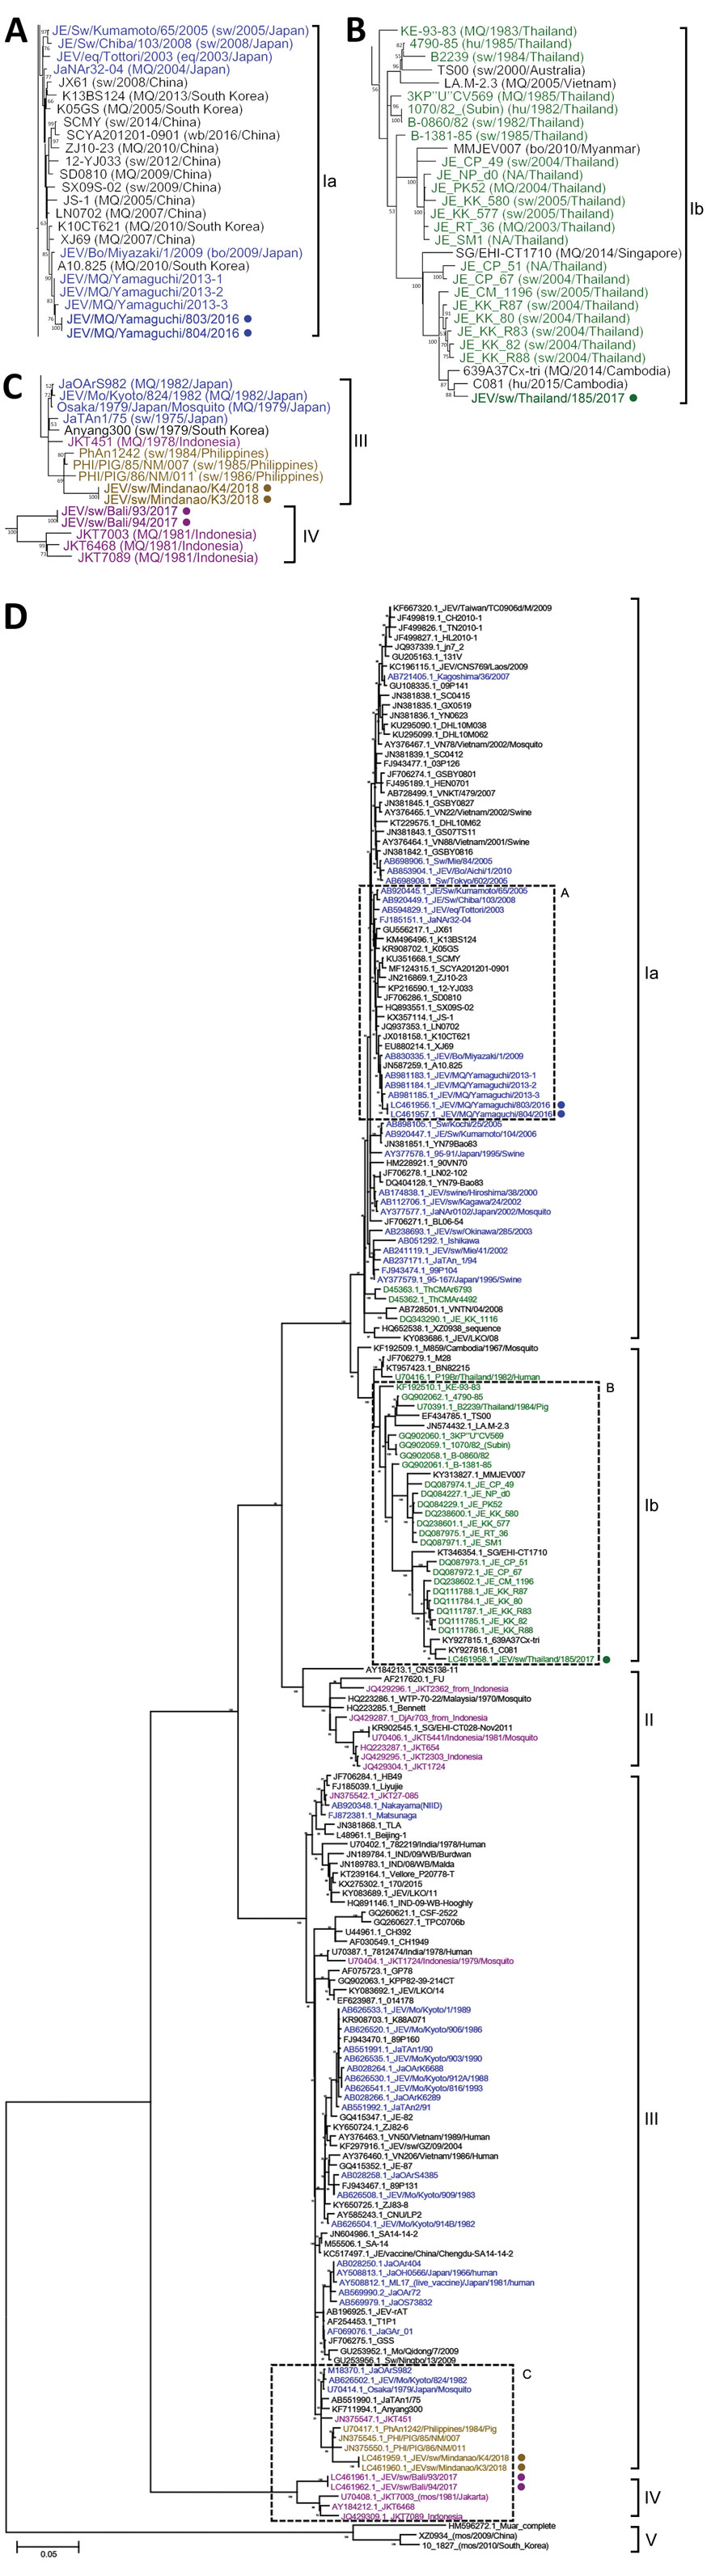 Maximum-likelihood phylogeny of JEV isolates, Japan and Southeast Asia, 2016–2018 (circles), and reference isolates constructed on the basis of the envelope gene sequence (1,500 nt). A) Genotype Ia (GIa); B) genotype GIb; C) genotypes GIII and GIV; D) parent tree showing all genotypes. Tree was reconstructed by using MEGA6 (https://megasoftware.net) with 100 bootstraps under the generalized time reversible model. JEVs isolated in Japan (blue), Thailand (green), the Philippines (yellow), and Indo